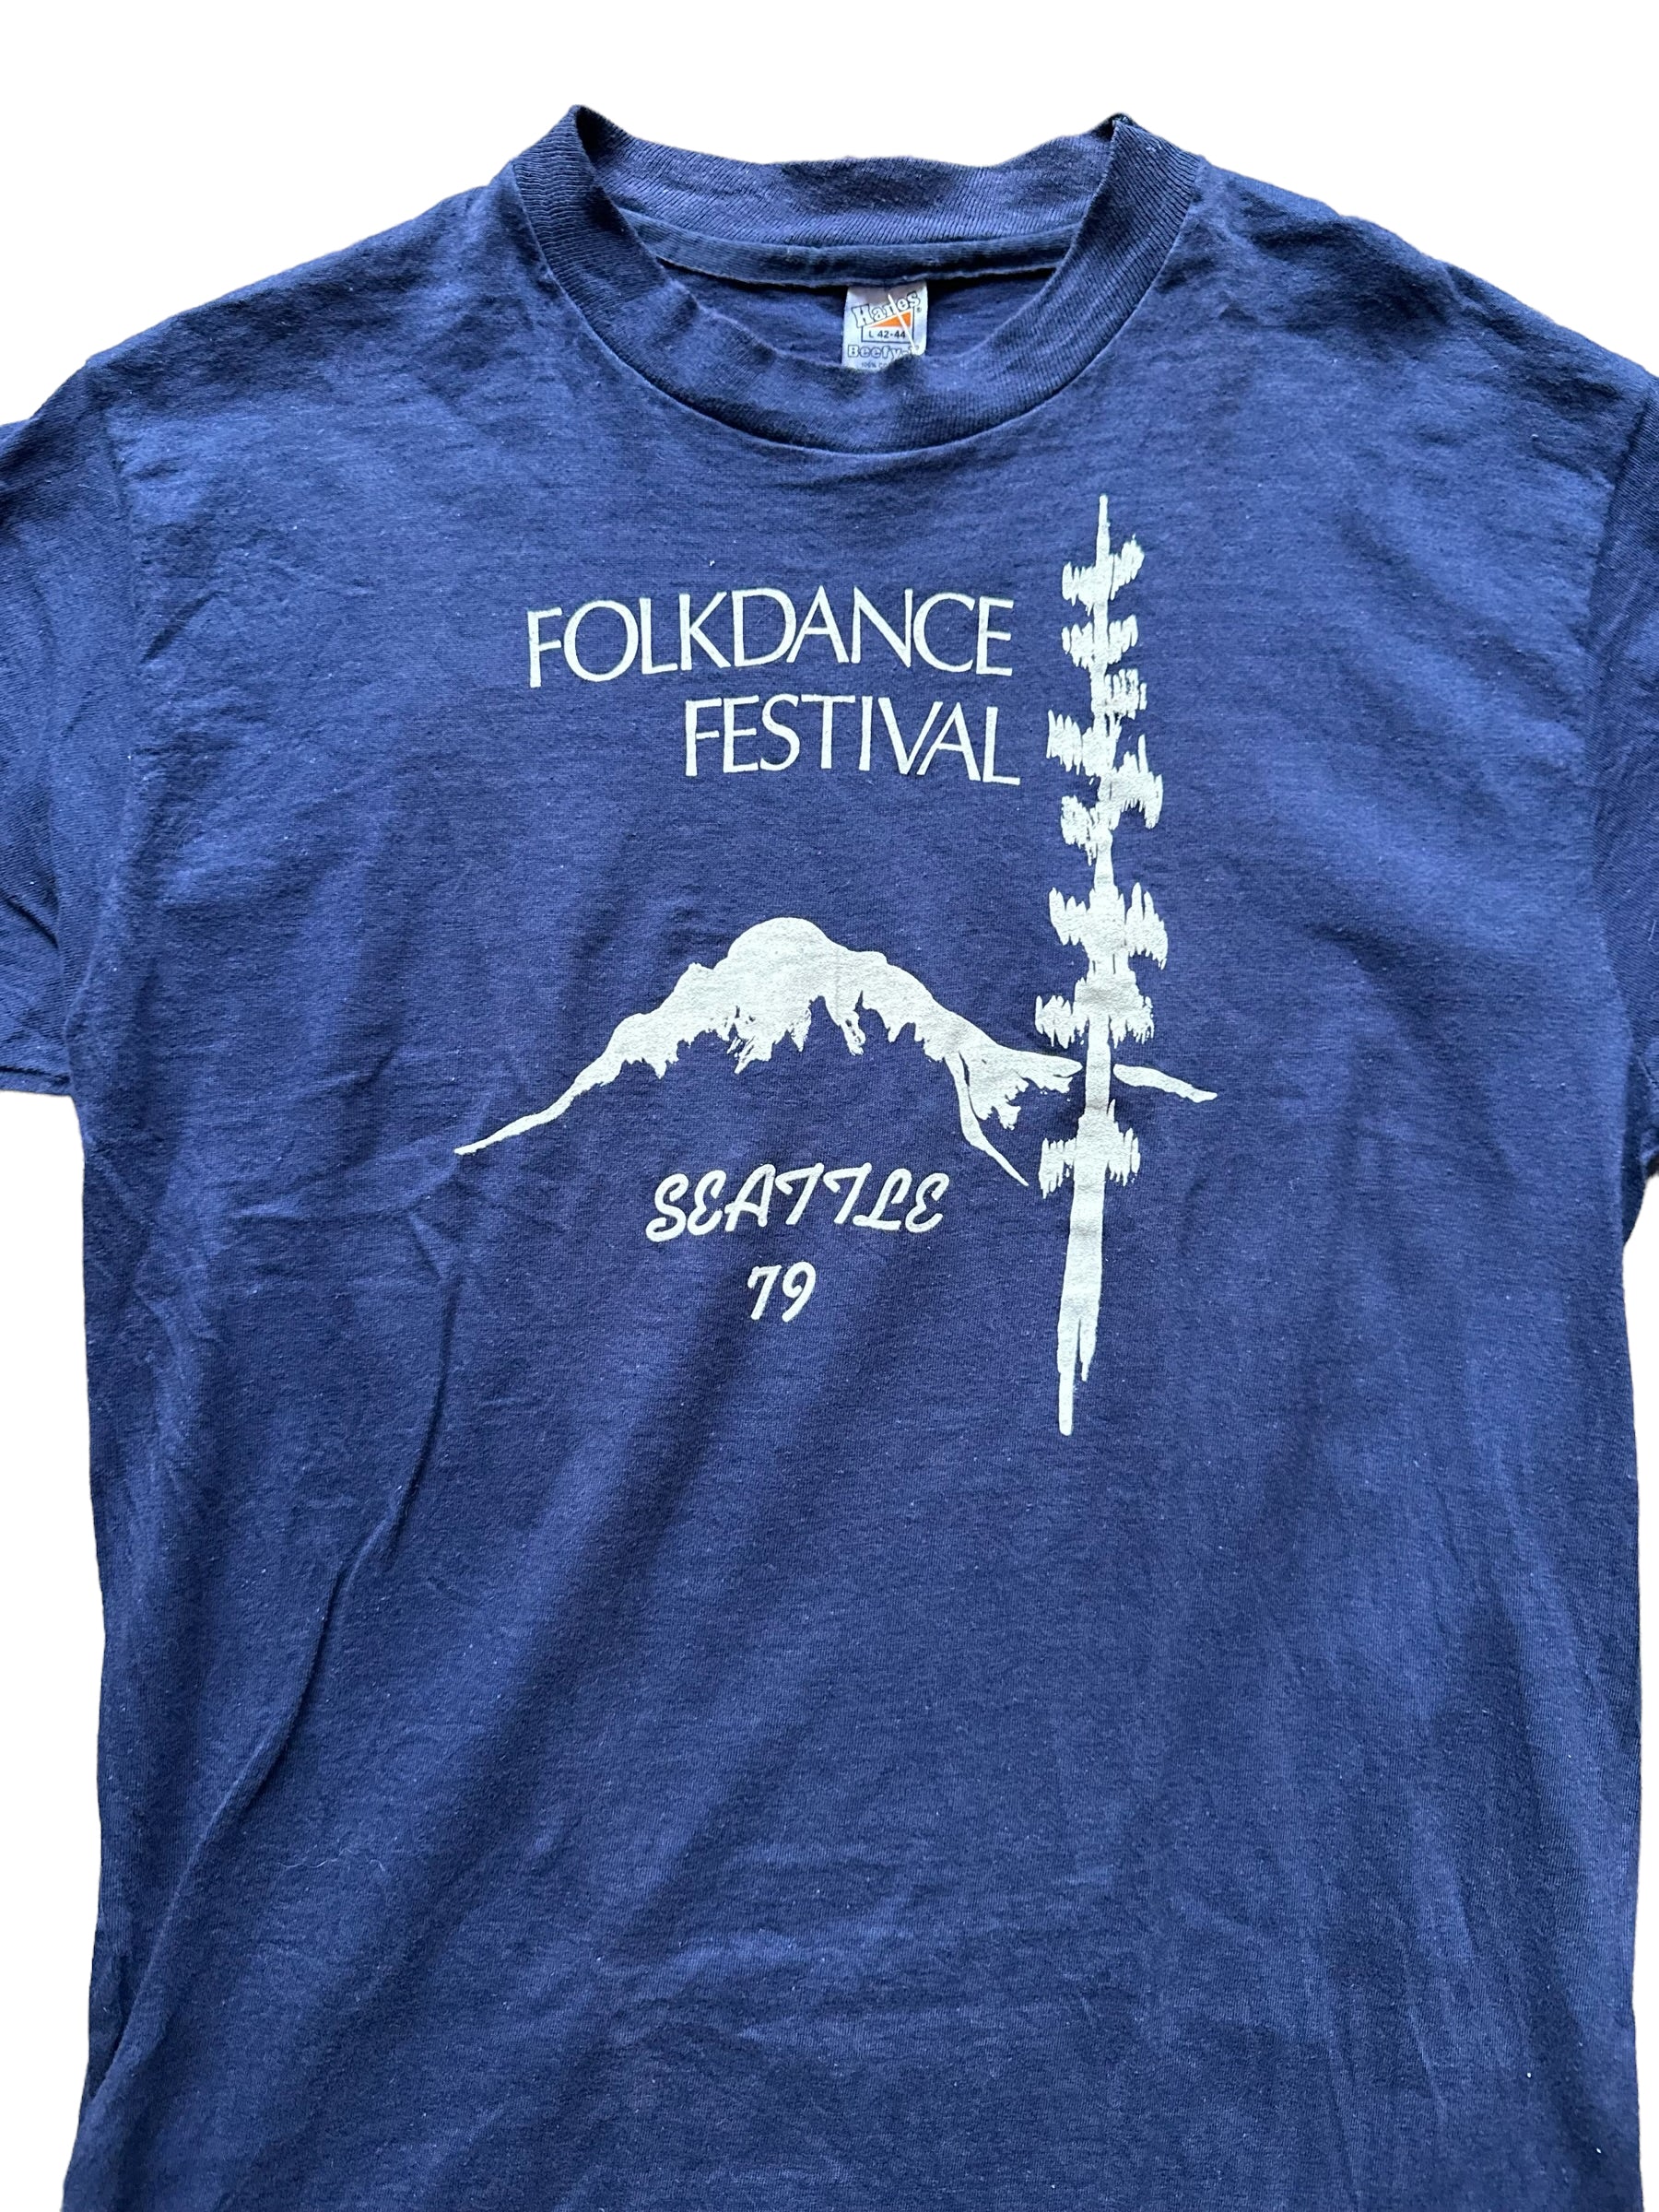 Front Graphic Close Up on Vintage Single Stitch Folkdance Festival Seattle Tee SZ Large |  Vintage Folkdance Graphic T Shirt Seattle | Barn Owl Vintage